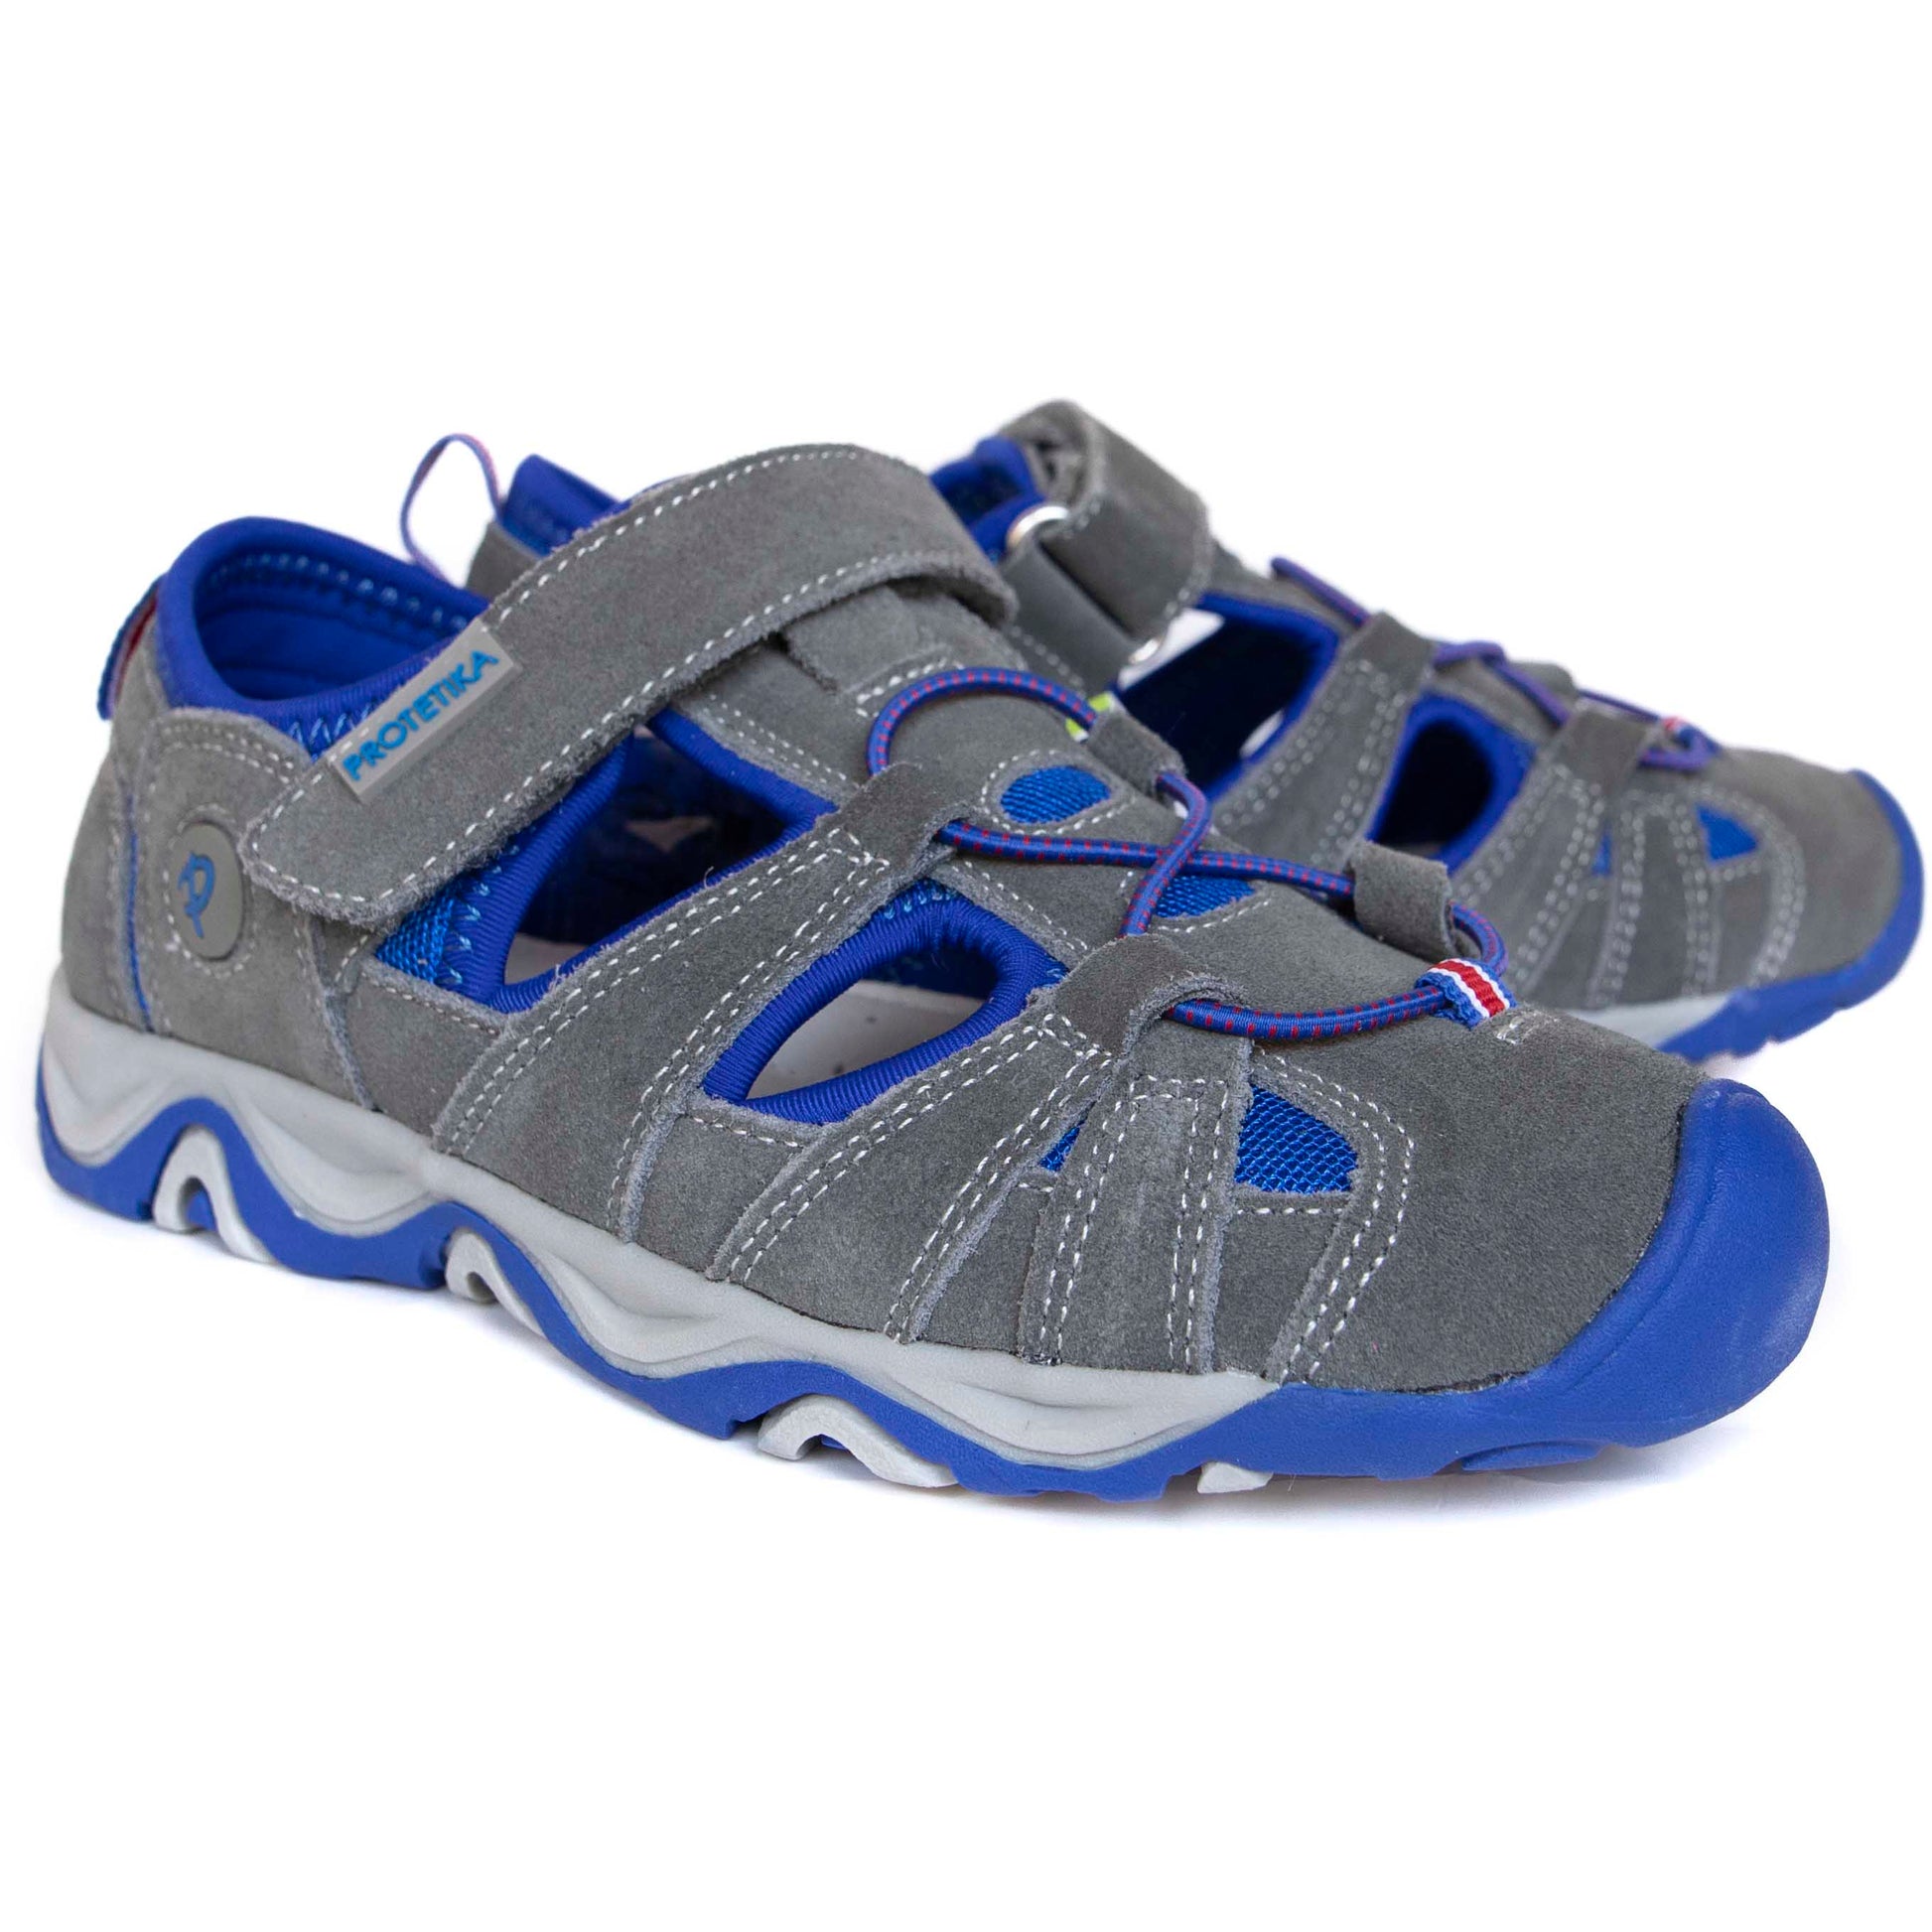 DAFY grey from Protetika brand are a suede leather sports sandals which will provide a whole day comfort to your boy.